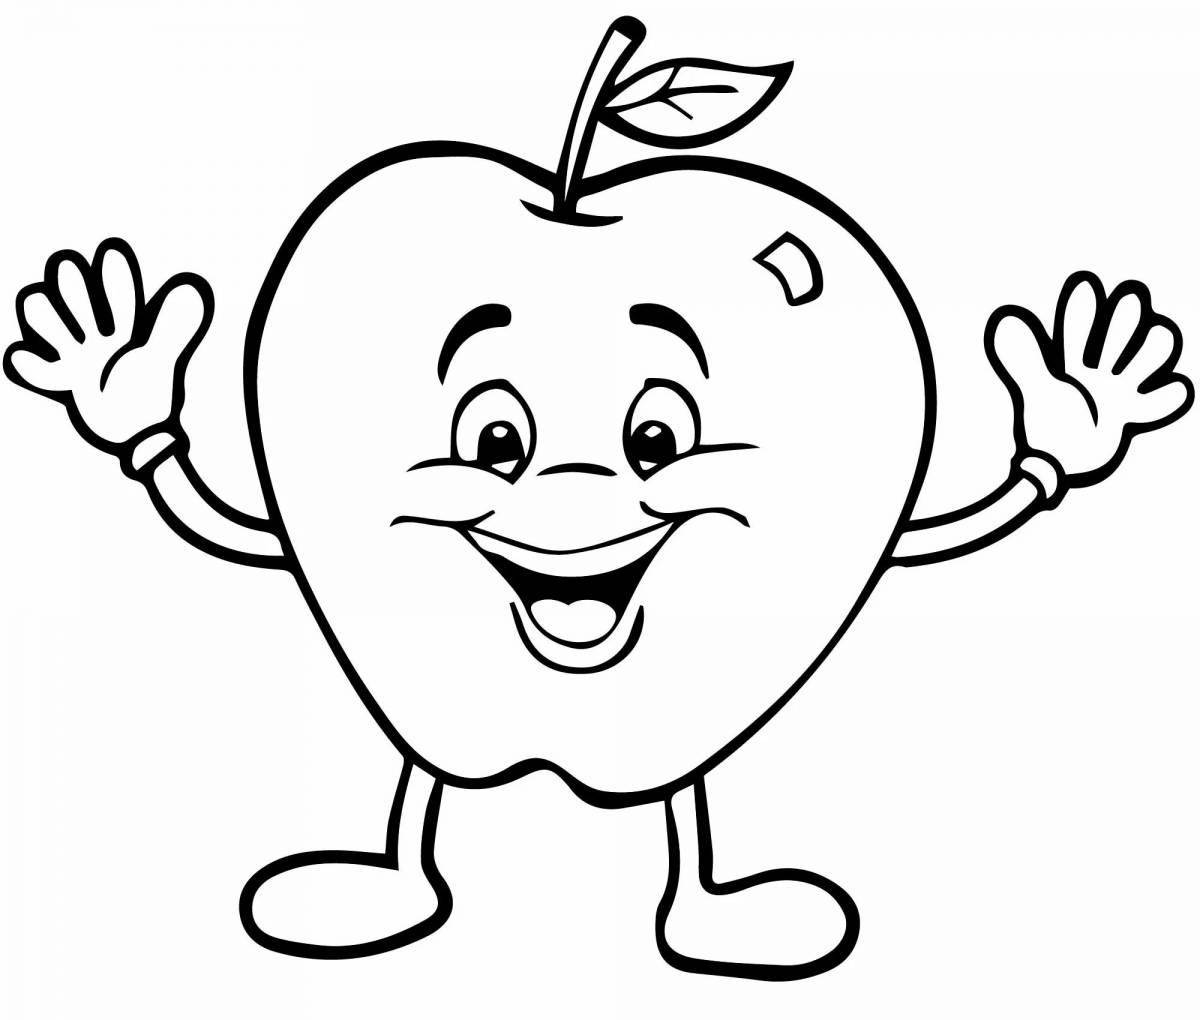 Luminous fruit coloring pages funny